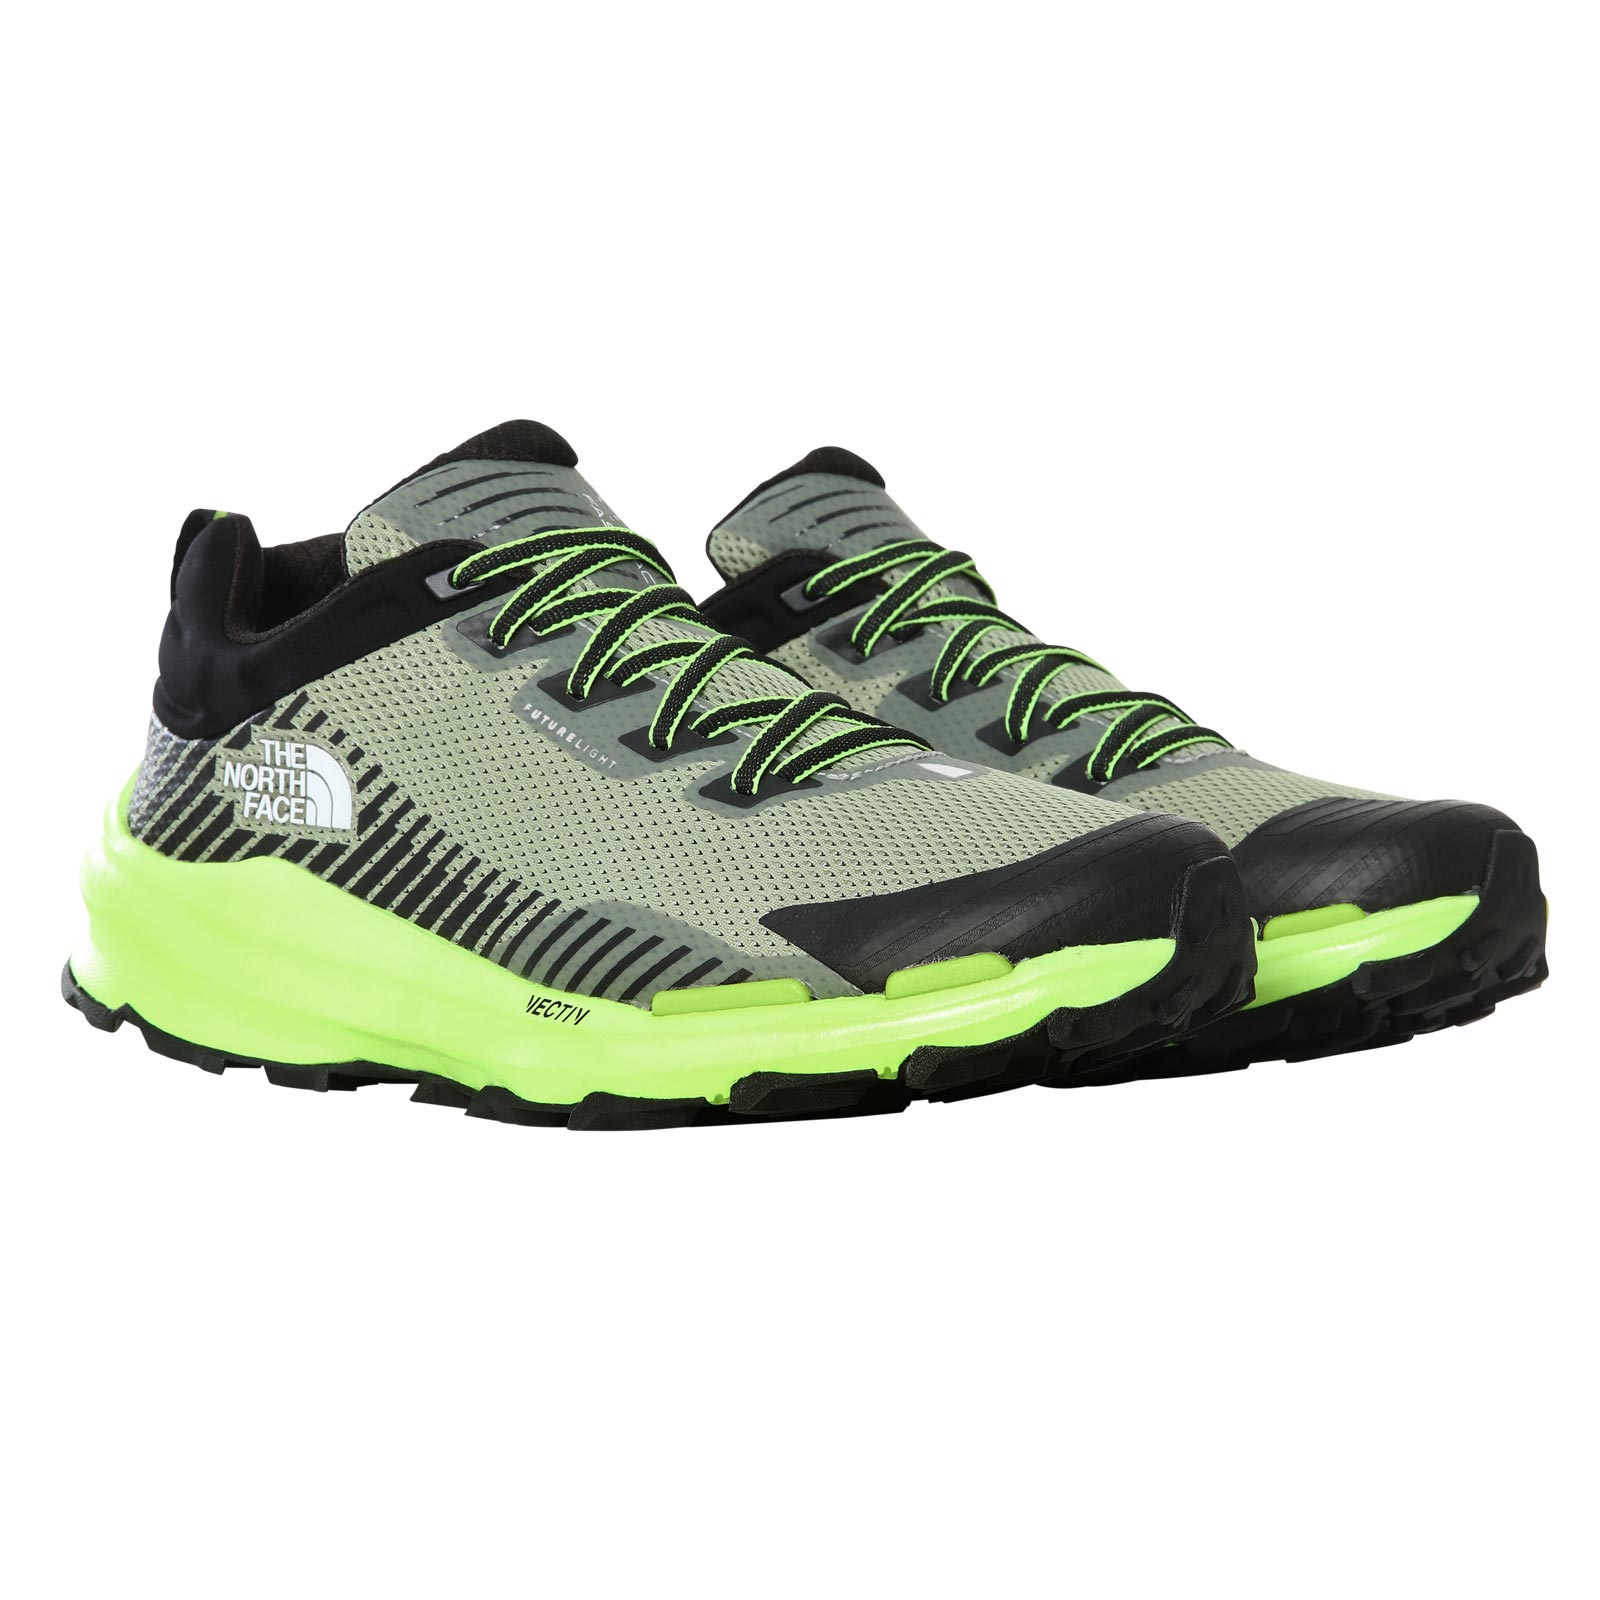 THE NORTH FACE VECTIV™ FASTPACK FUTURELIGHT™ MENS HIKING SHOES